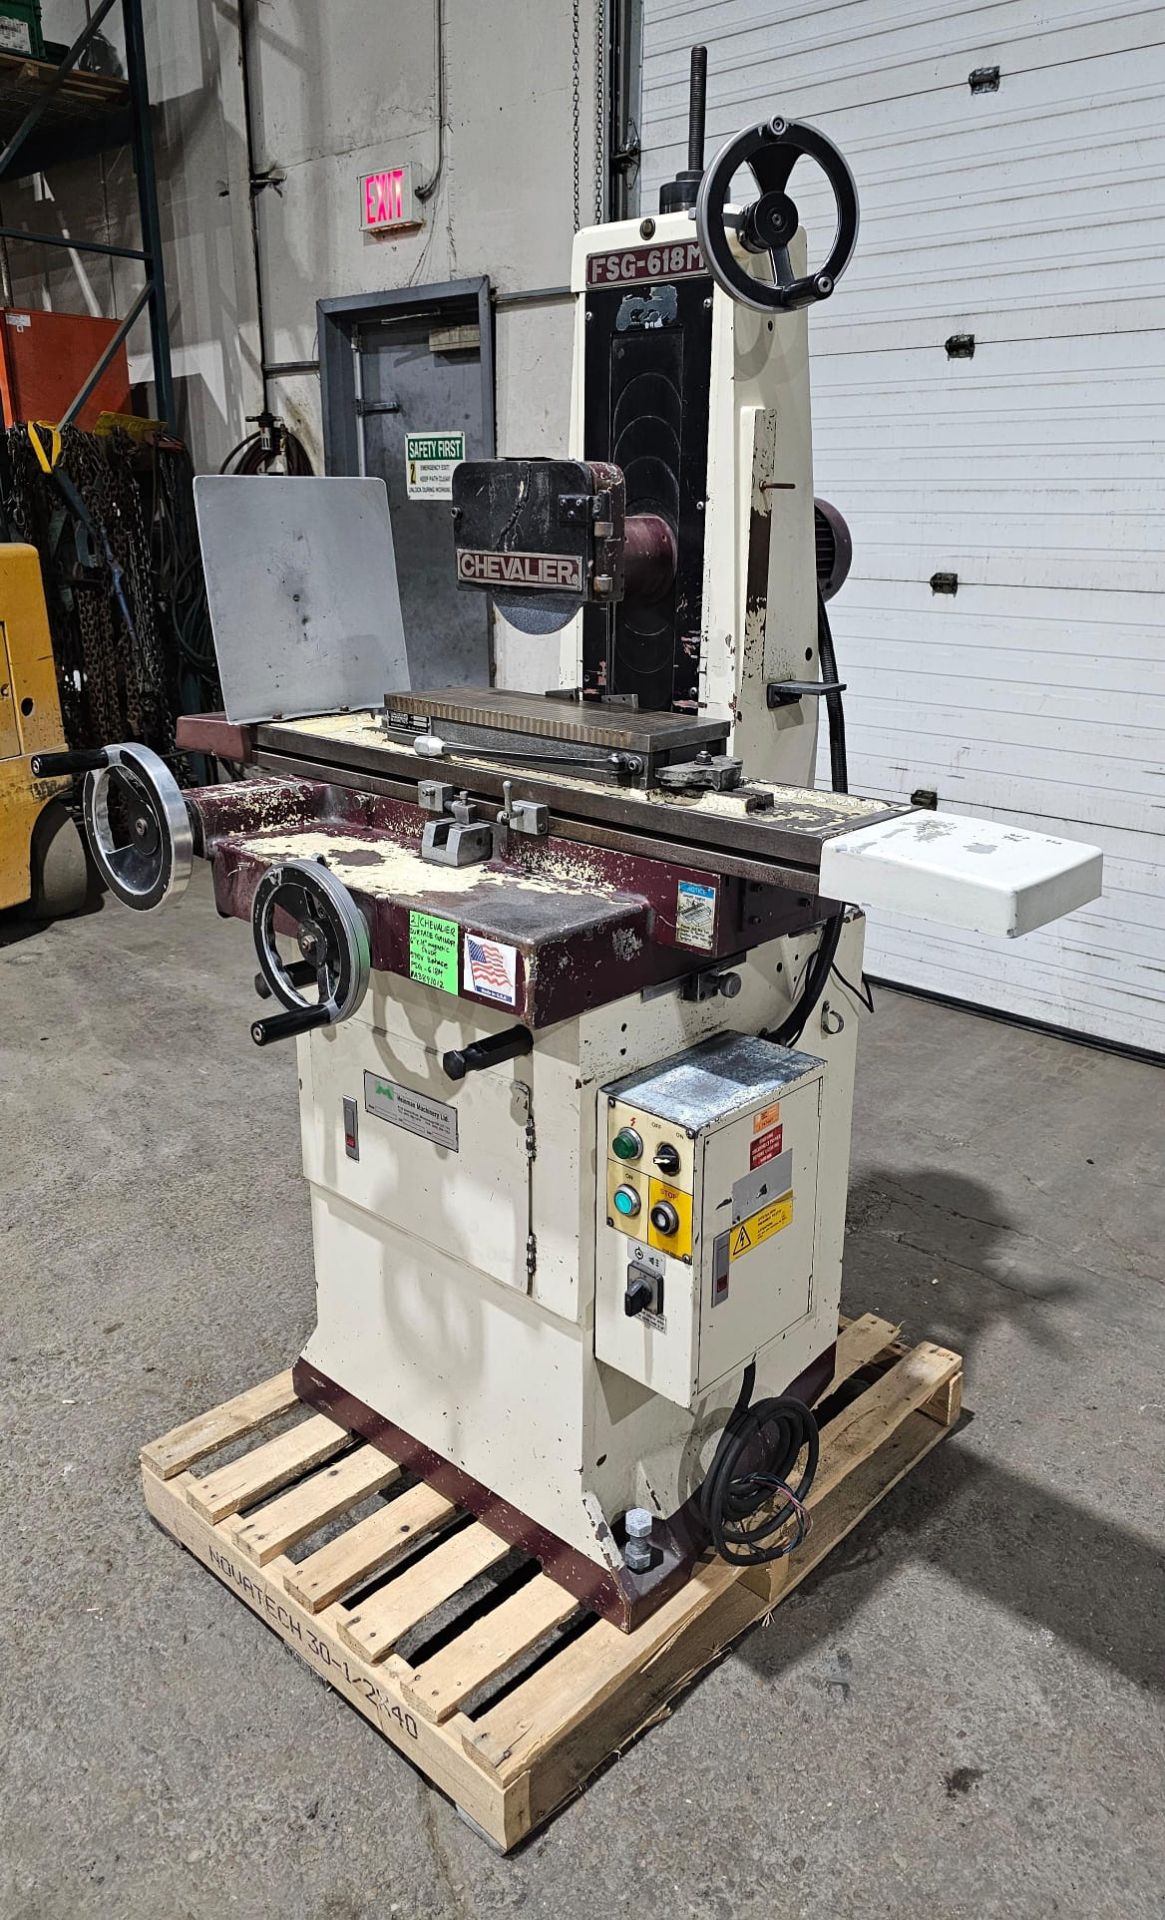 CHEVALIER Hydraulic Surface Grinder 18" x 6" Magnetic Chuck model: FSG-618M 575v 3 phase